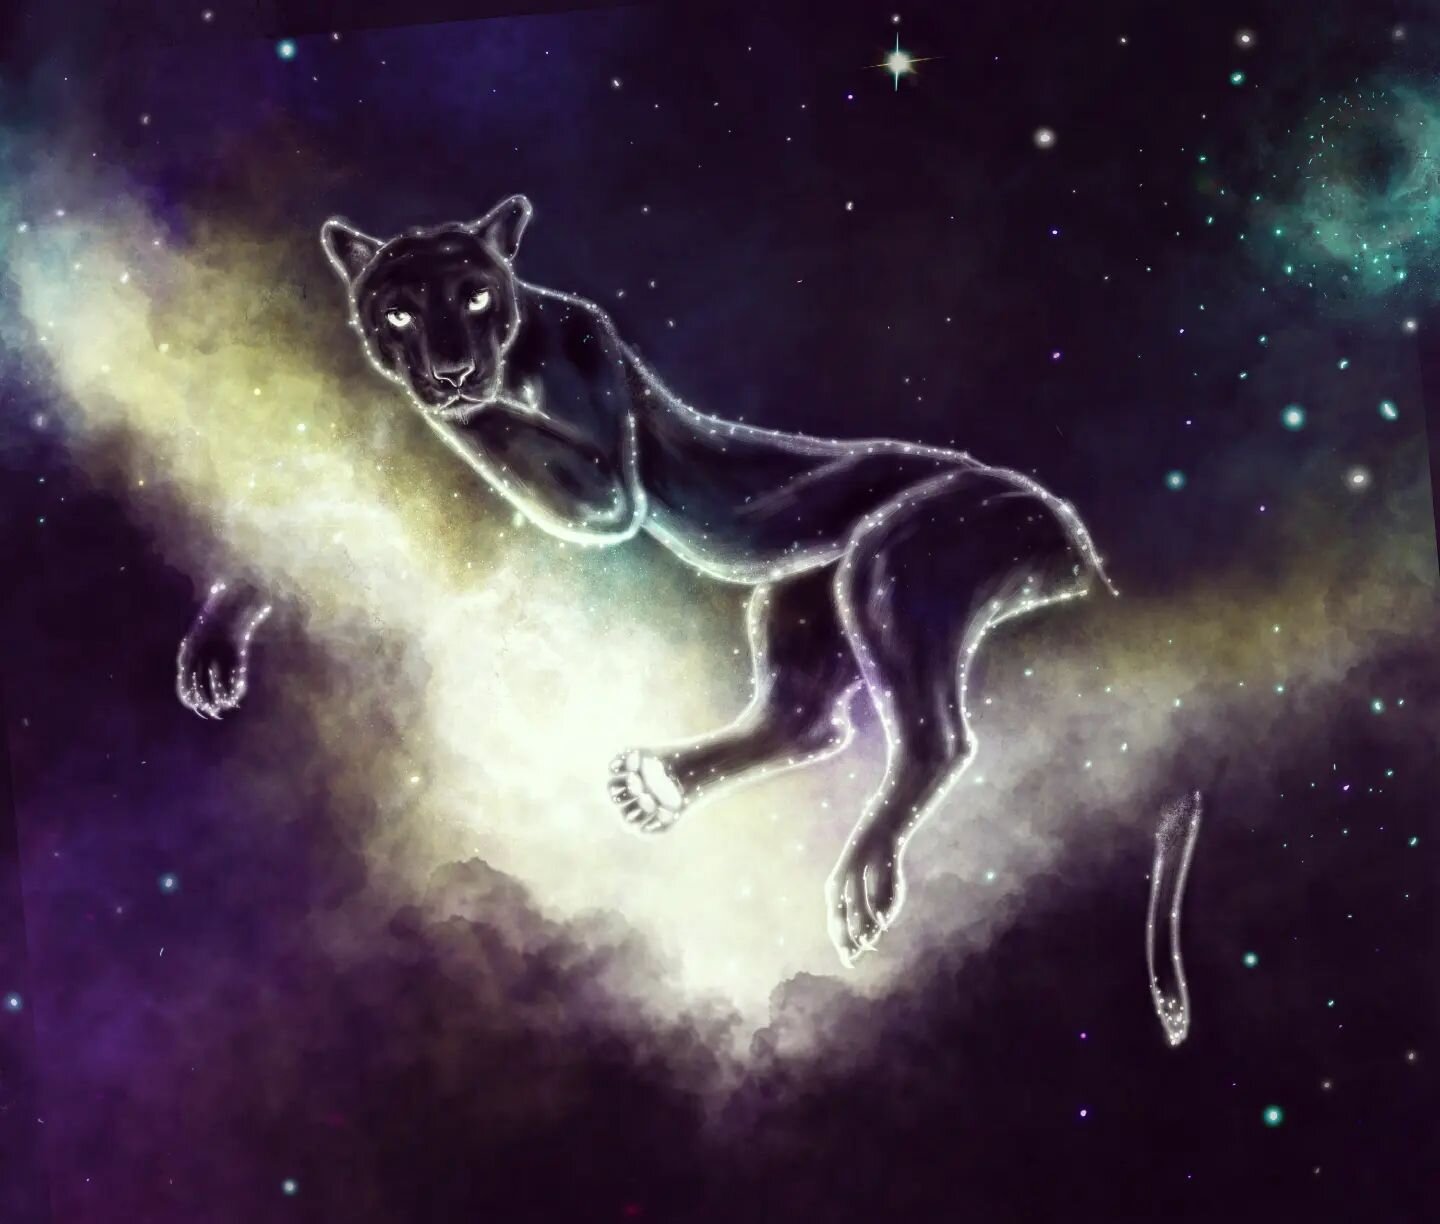 🐆🌌 Please enjoy this Space Panther. 

And for those celebrating Good Friday, God Bless. ✨️

#cosmicbeing #adventureapril #space #cosmos #spaceart #cosmicpainting #scifi #fantasy #art #artnerd #procreate #instaart #instagood #blackpanther #cosmic #s